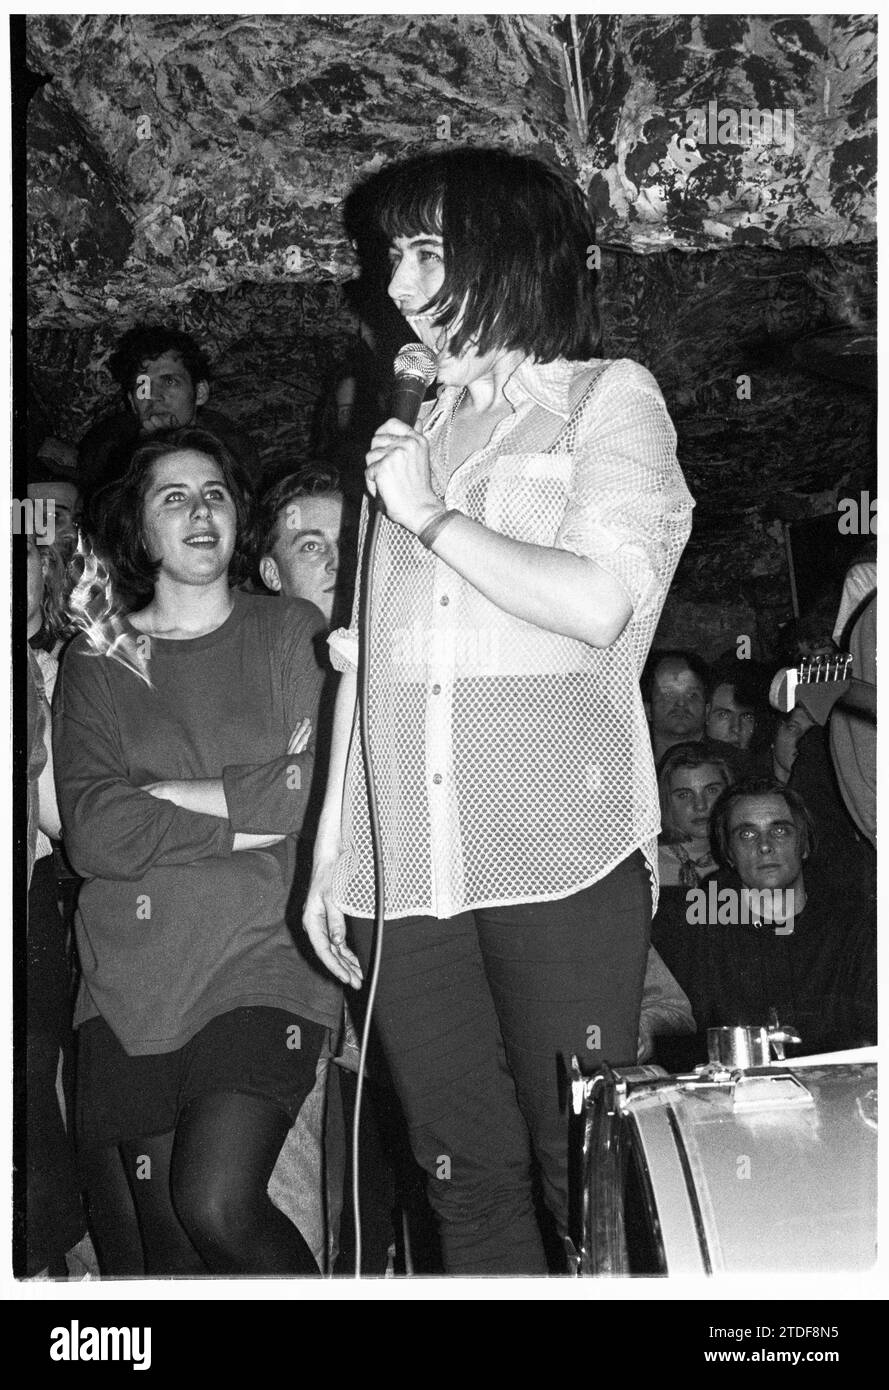 KATHLEEN HANNA, BIKINI KILL, NEWPORT TJS, 1993: Kathleen Hanna the singer of Bikini Kill playing at the Legendary TJs in Newport, Wales, UK on 8 March 1993. This Bikini Kill/Huggy Bear Tour came at the peak of the Riot Grrrl scene and was to promote the two bands combined 1993 album Yeah Yeah Yeah Yeah (Kill Rock Stars). The gig started with a music workshop for women only. Photo: Rob Watkins Stock Photo